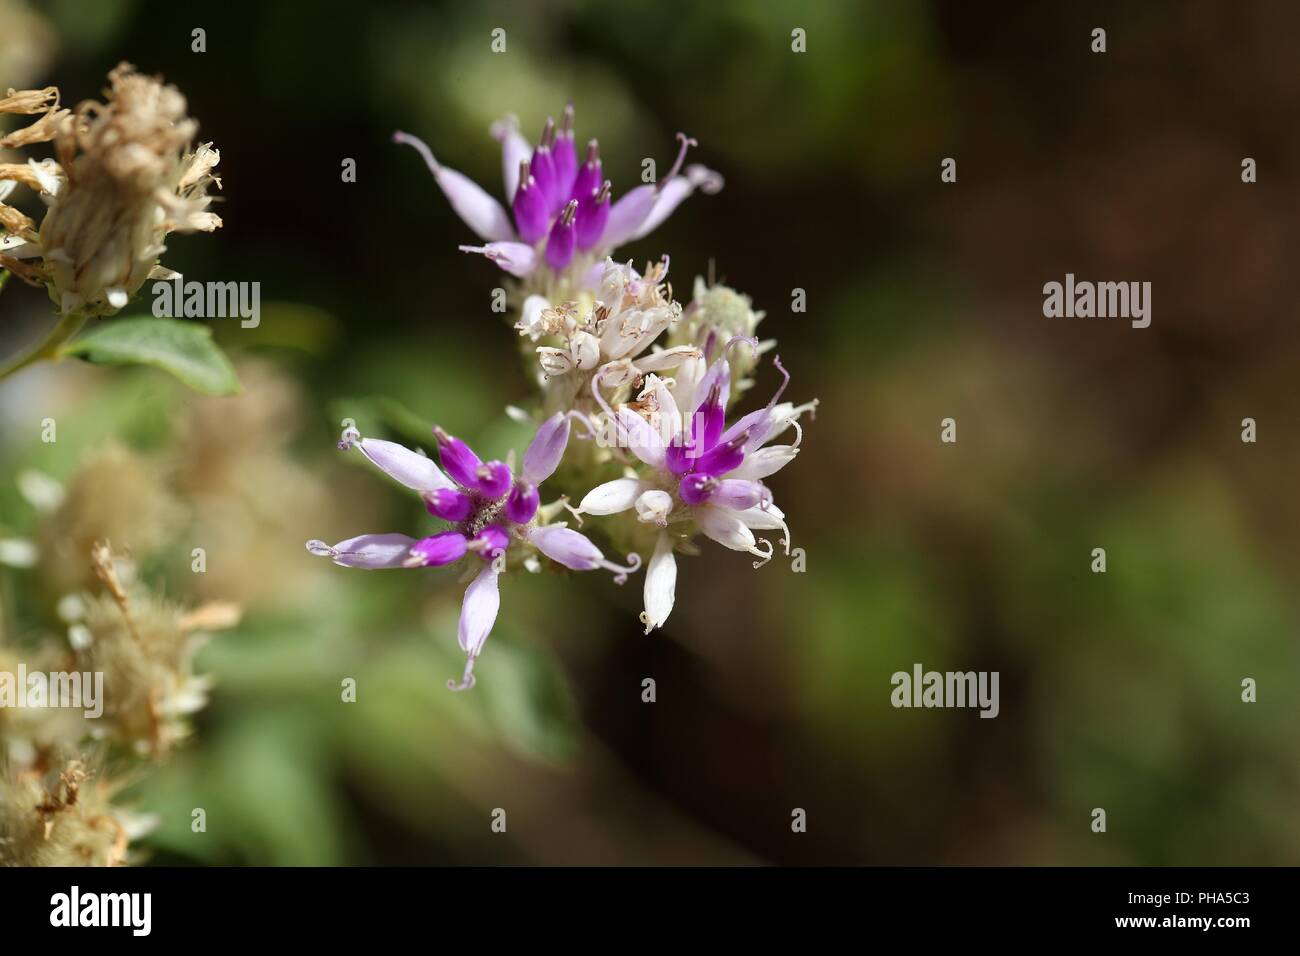 Flower of a succulent plant in Ethiopia Stock Photo